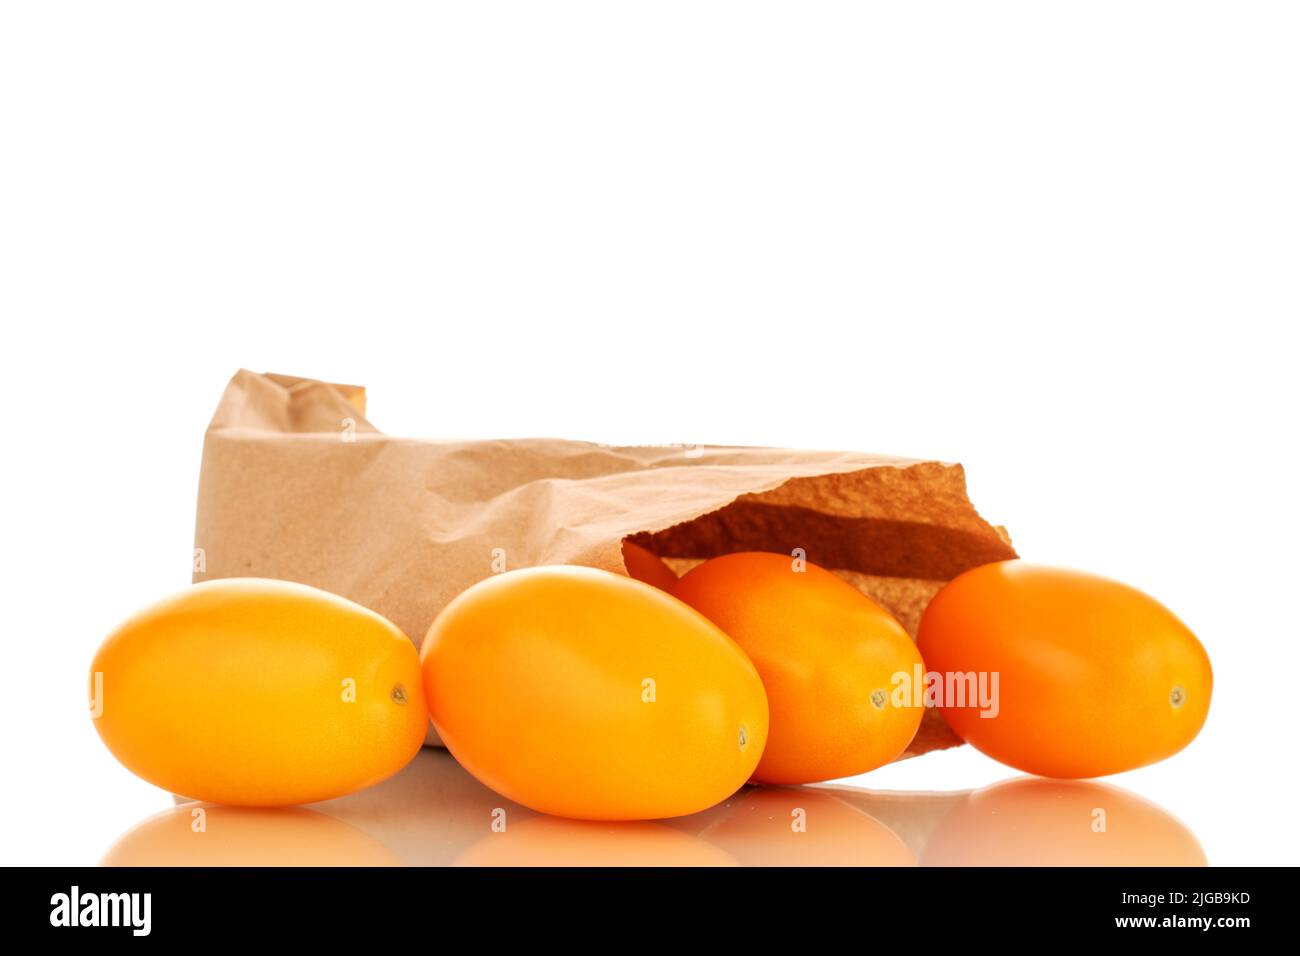 Several ripe yellow tomatoes with a paper bag, close-up, isolated on a white background. Stock Photo